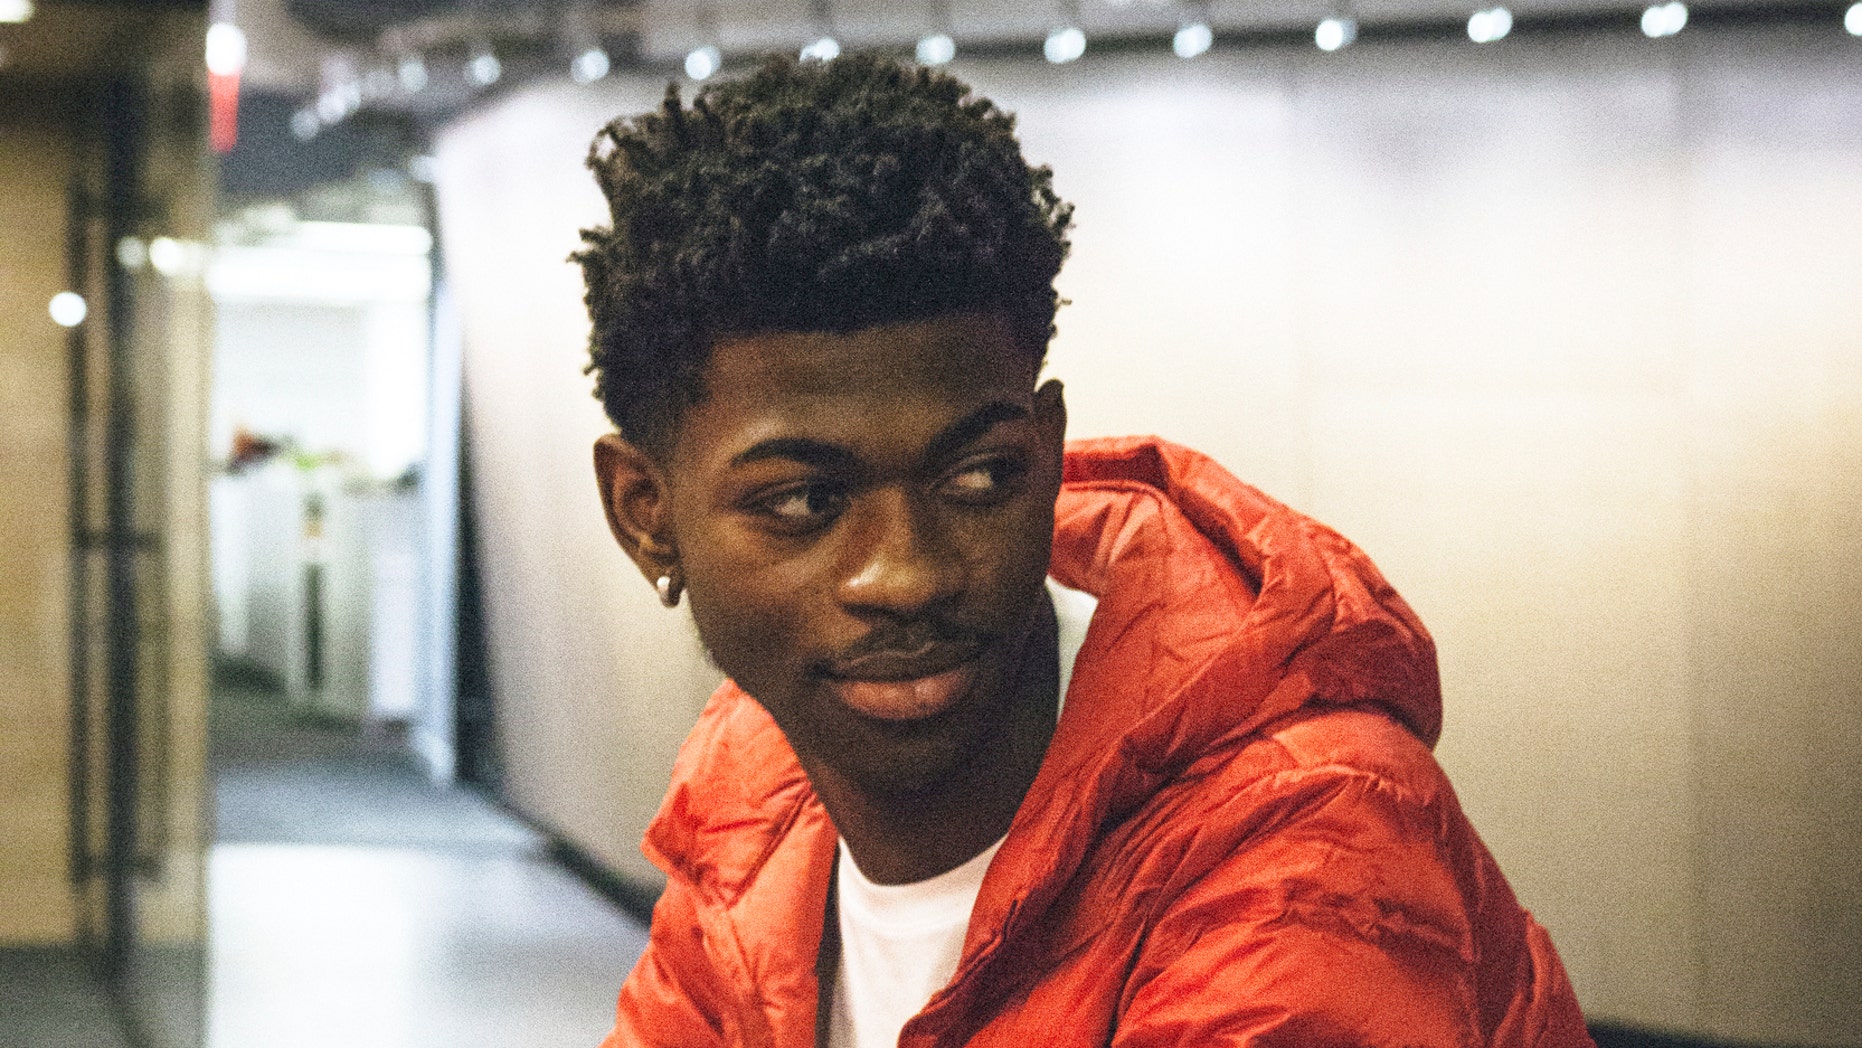 Lil Nas X Hit Old Town Road Pulled From Billboard Country Chart Sparking Outcry Fox News 5705